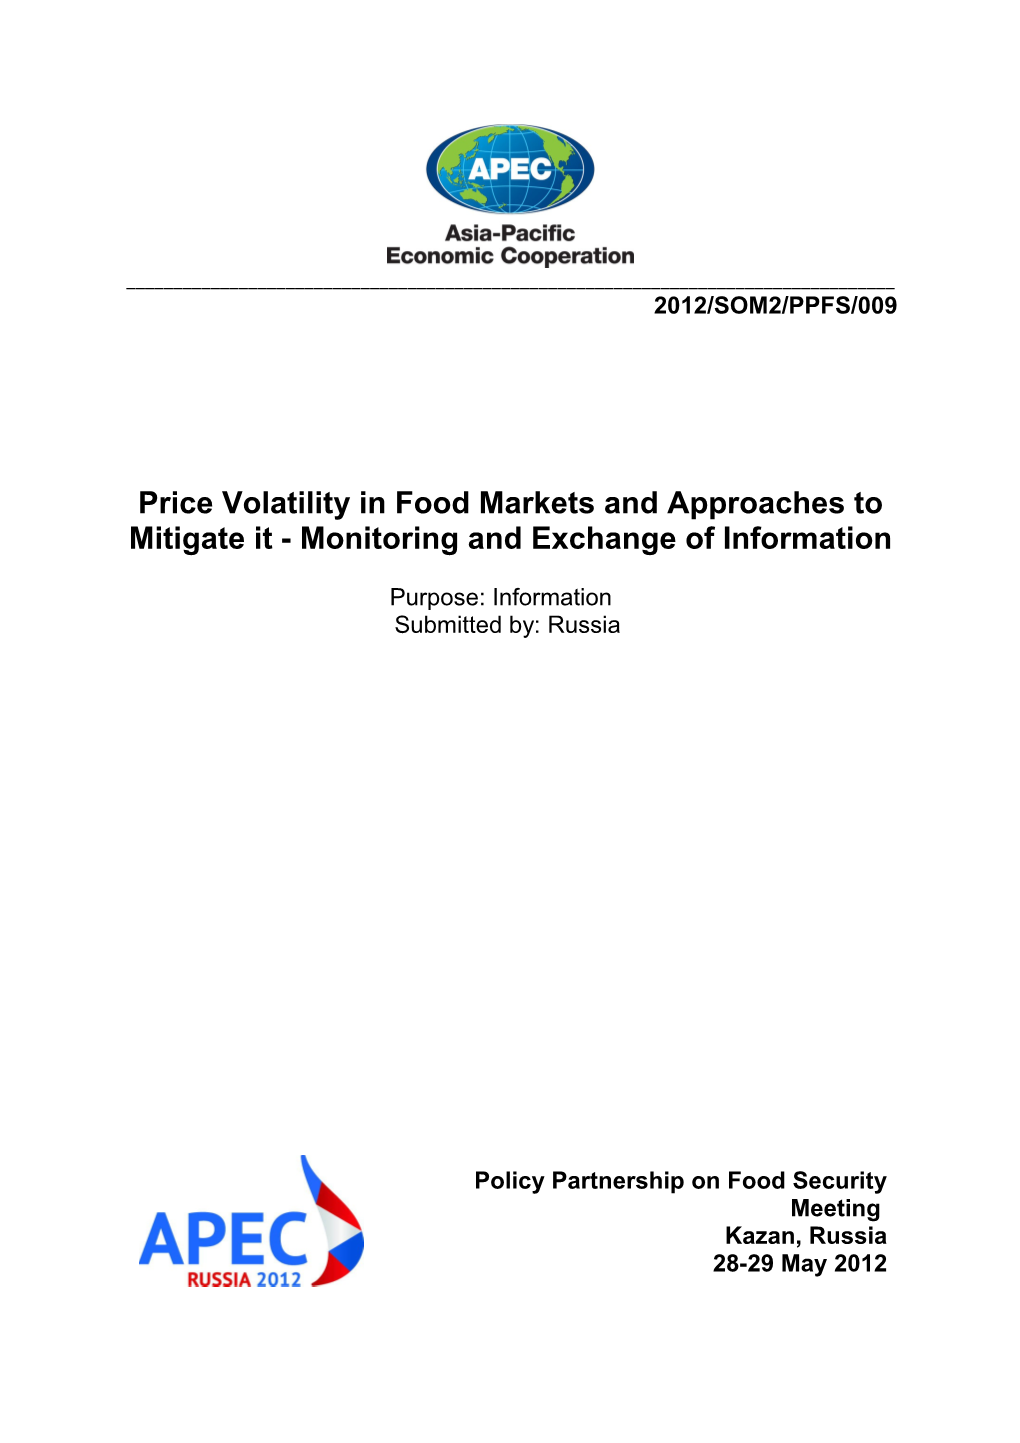 Price Volatility in Food Markets and Approaches Tomitigate It - Monitoring and Exchange